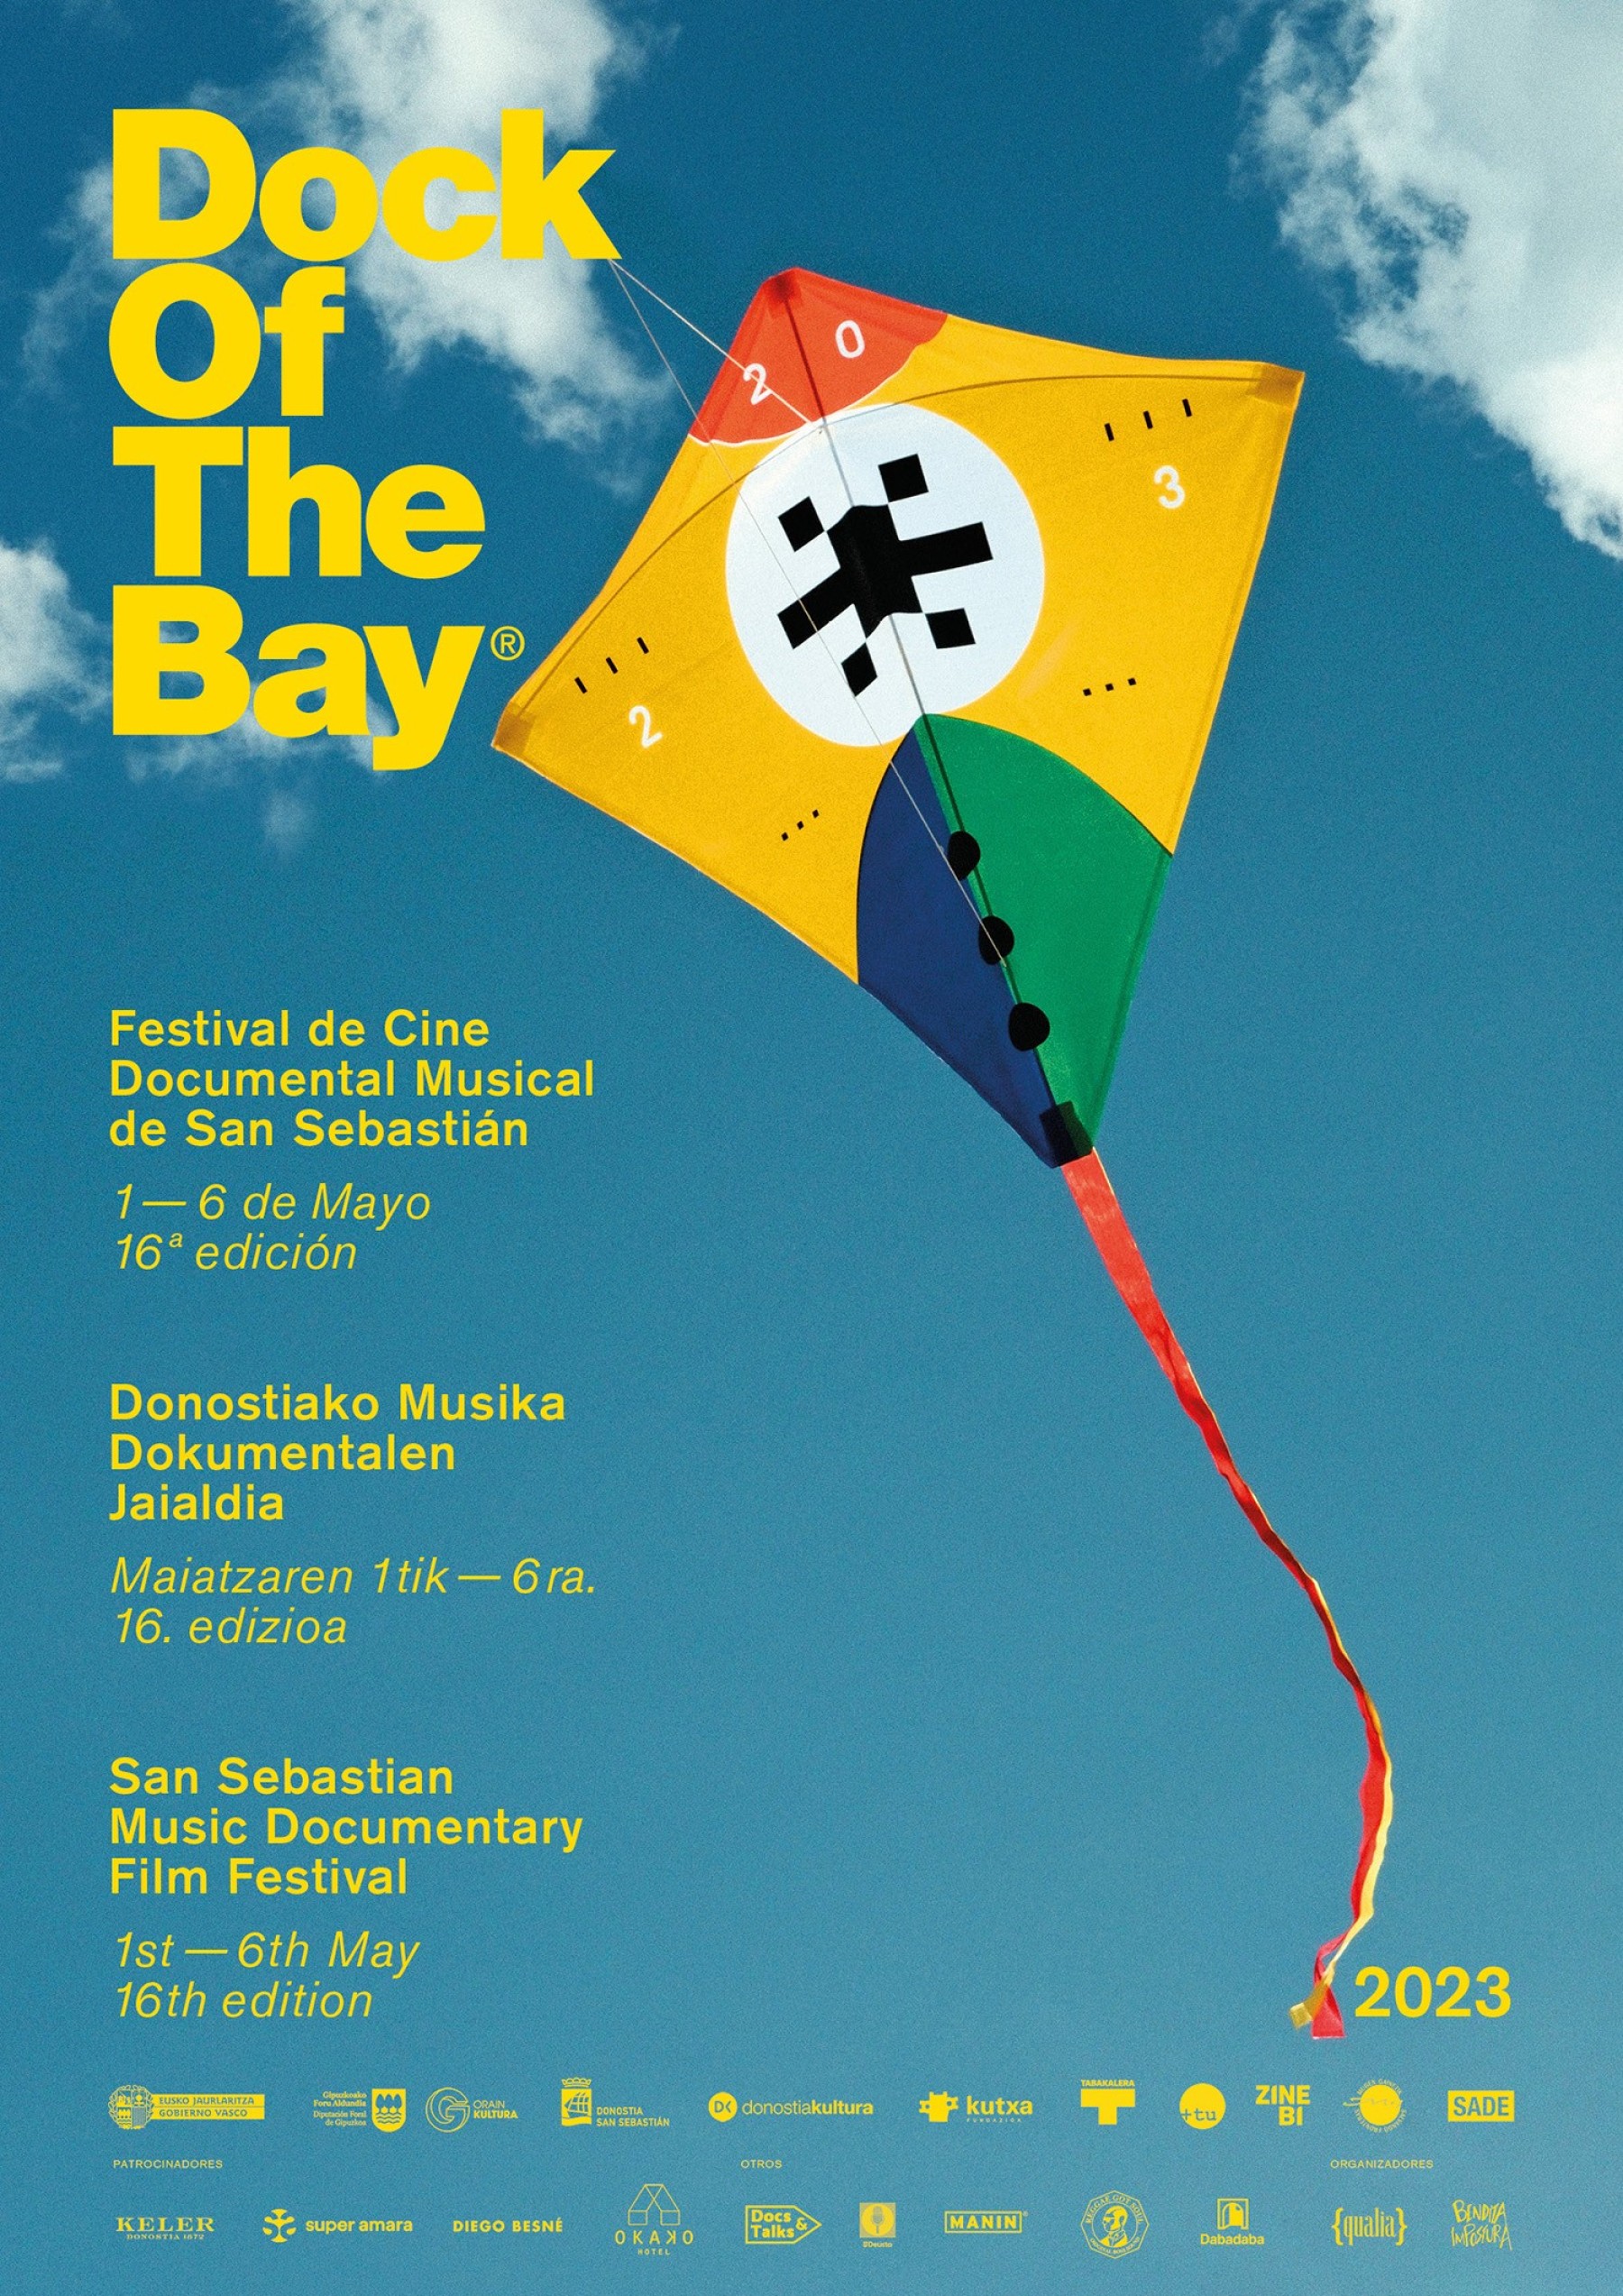 Dock of the Bay, the Donostia Music Documentary Film Festival, presents its entire program.